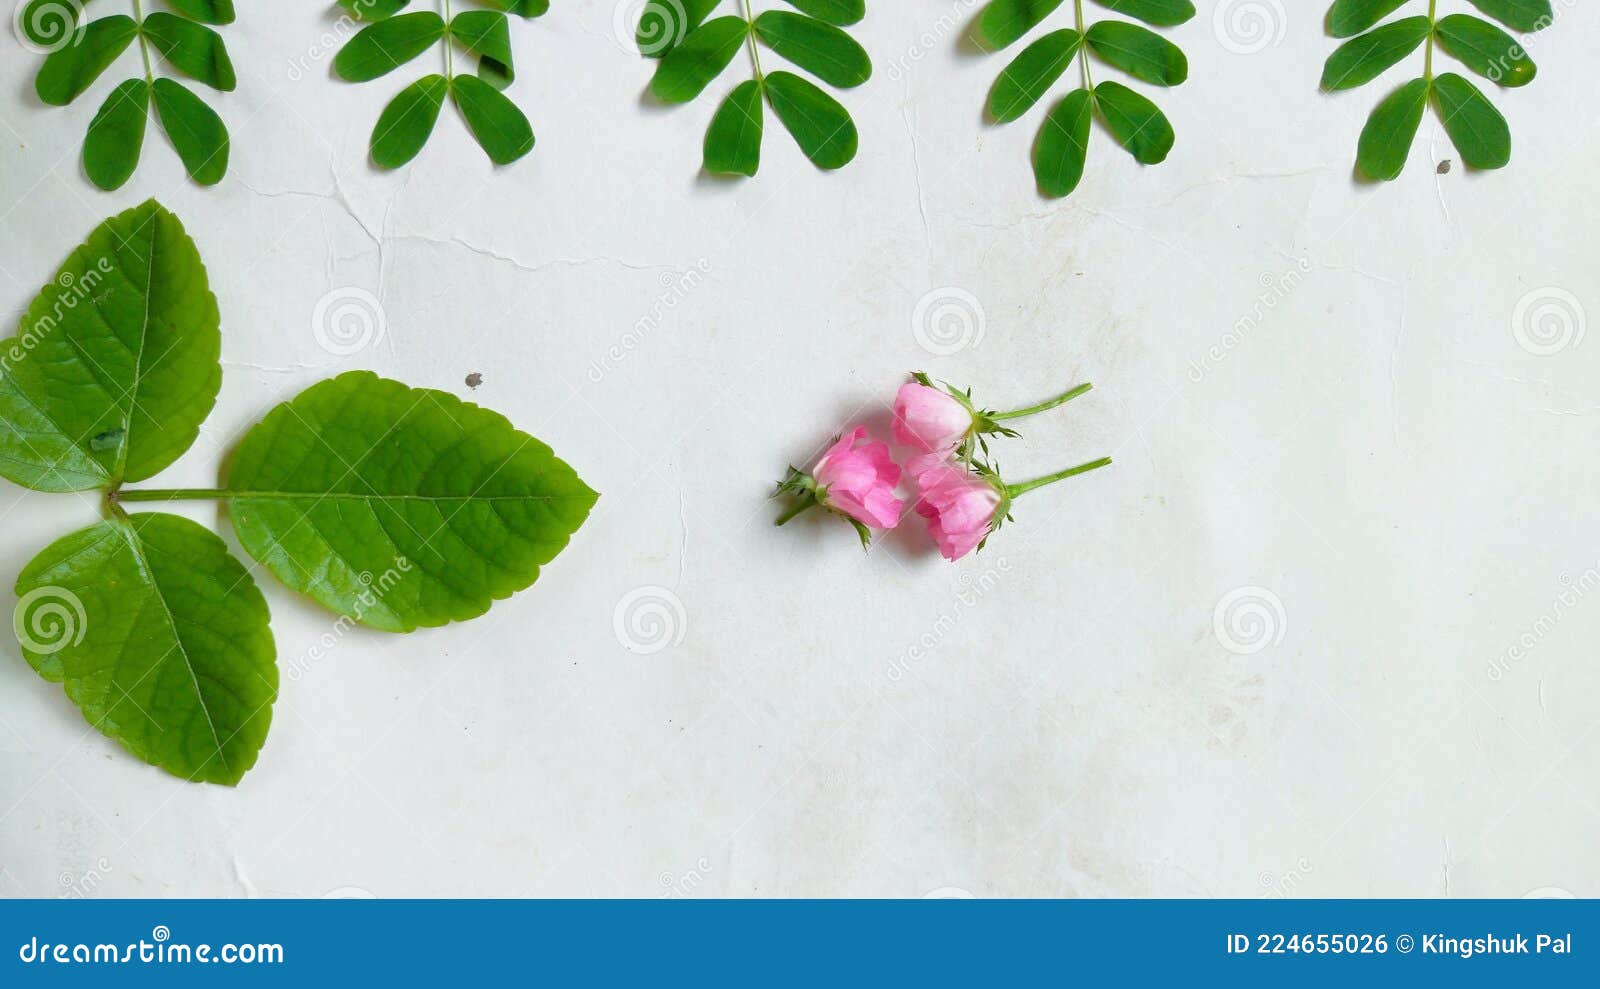 jangle green leaf  and flowers with white background